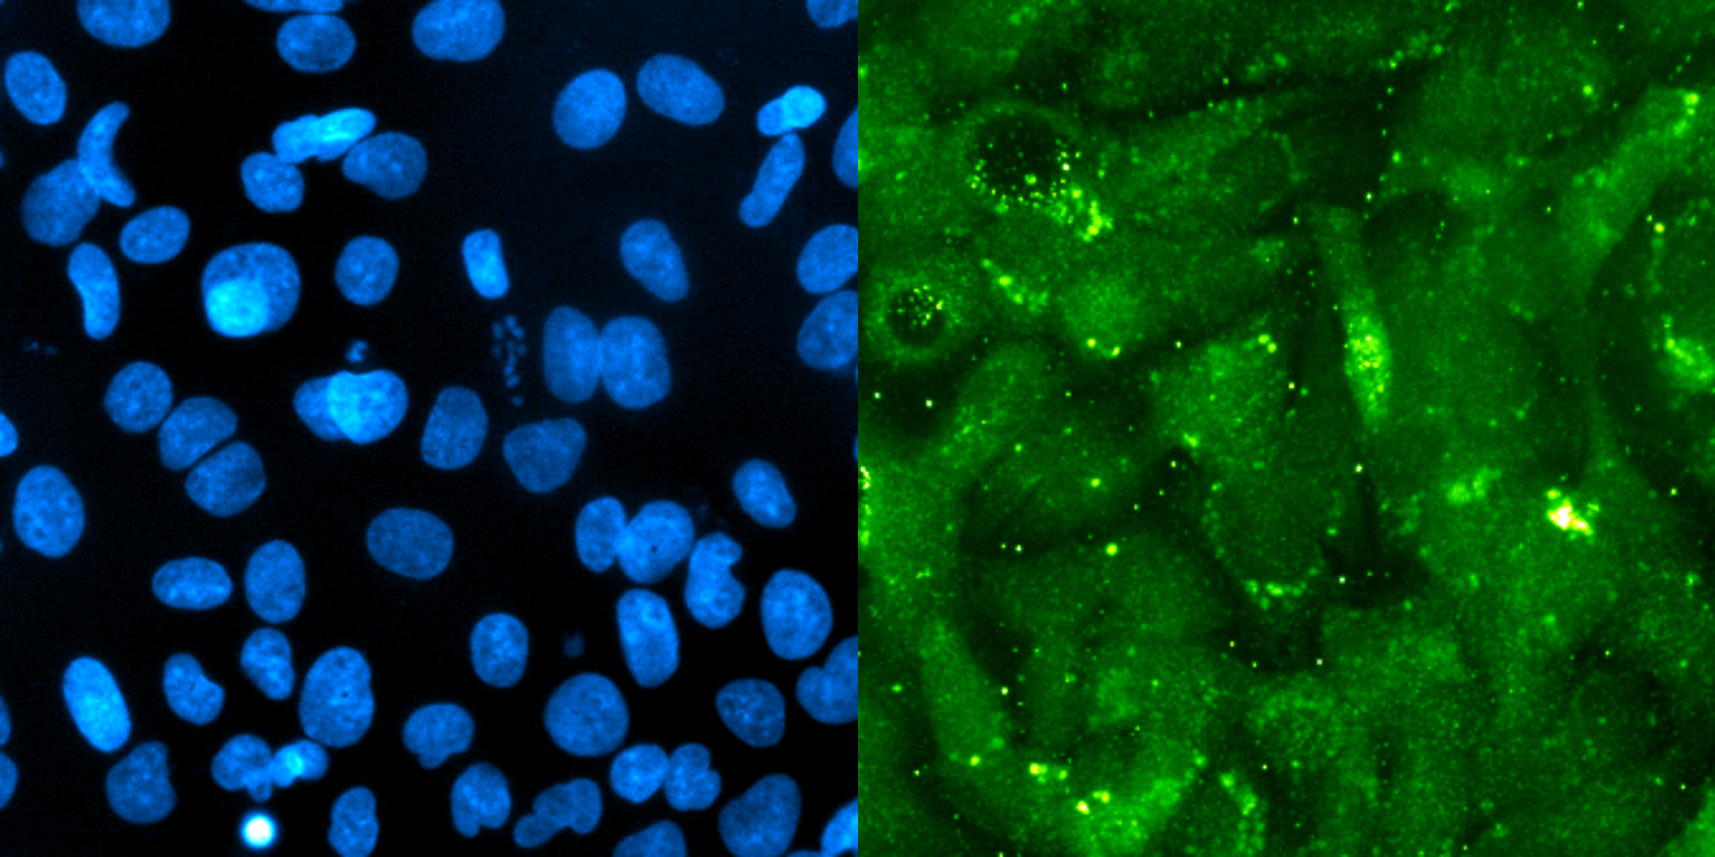 microscopy image of mouse liver cells infected by plasmodium